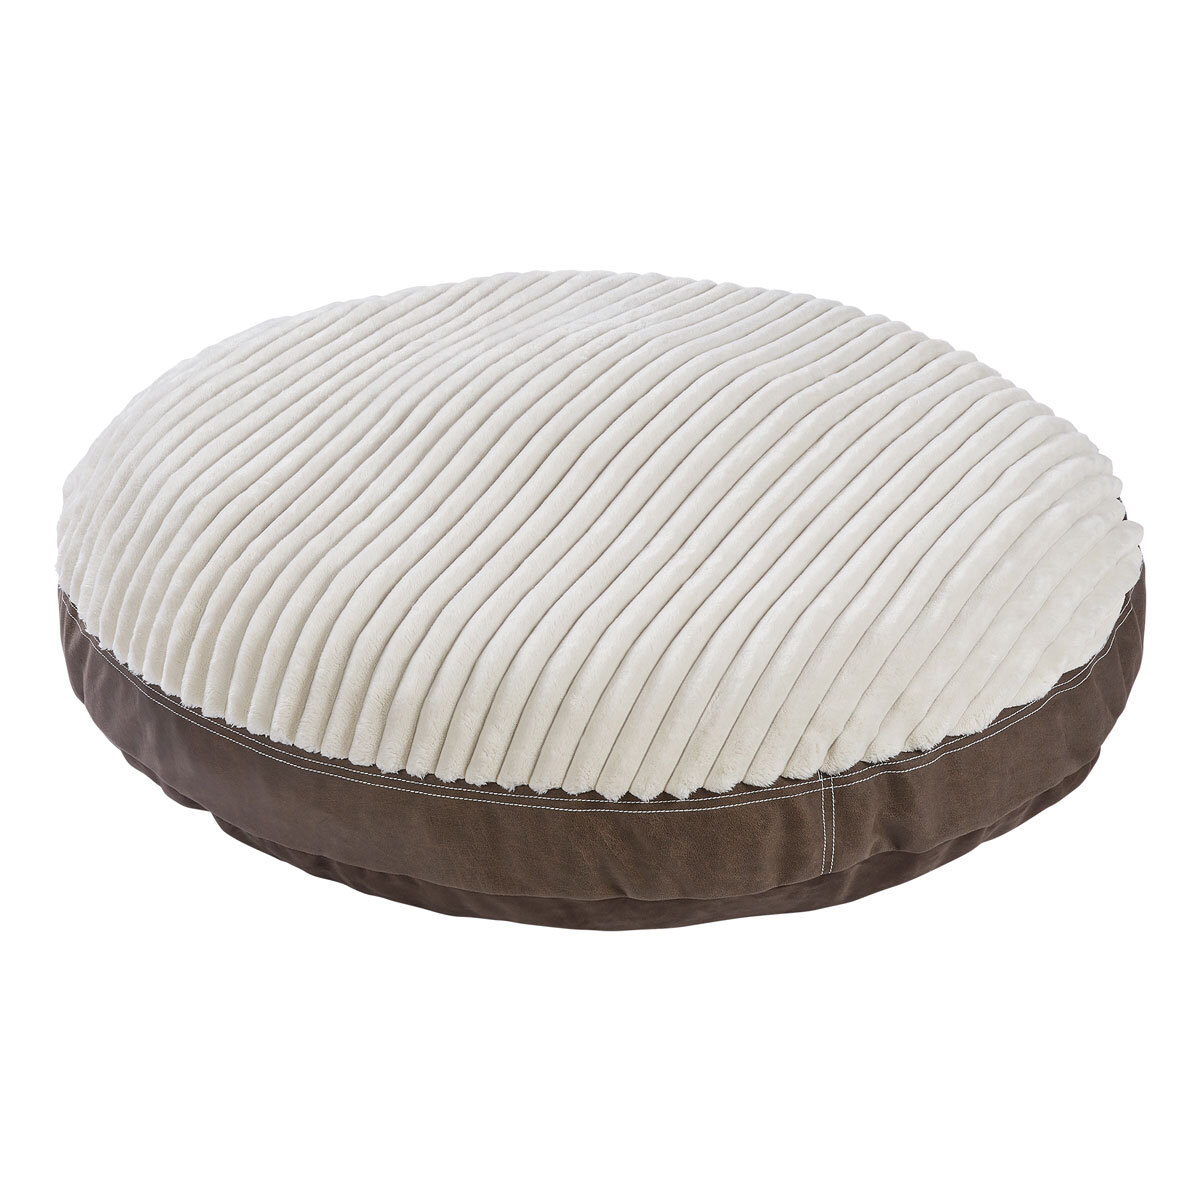 Kirkland Signature Round Pet Bed in Faux Leather, 42"